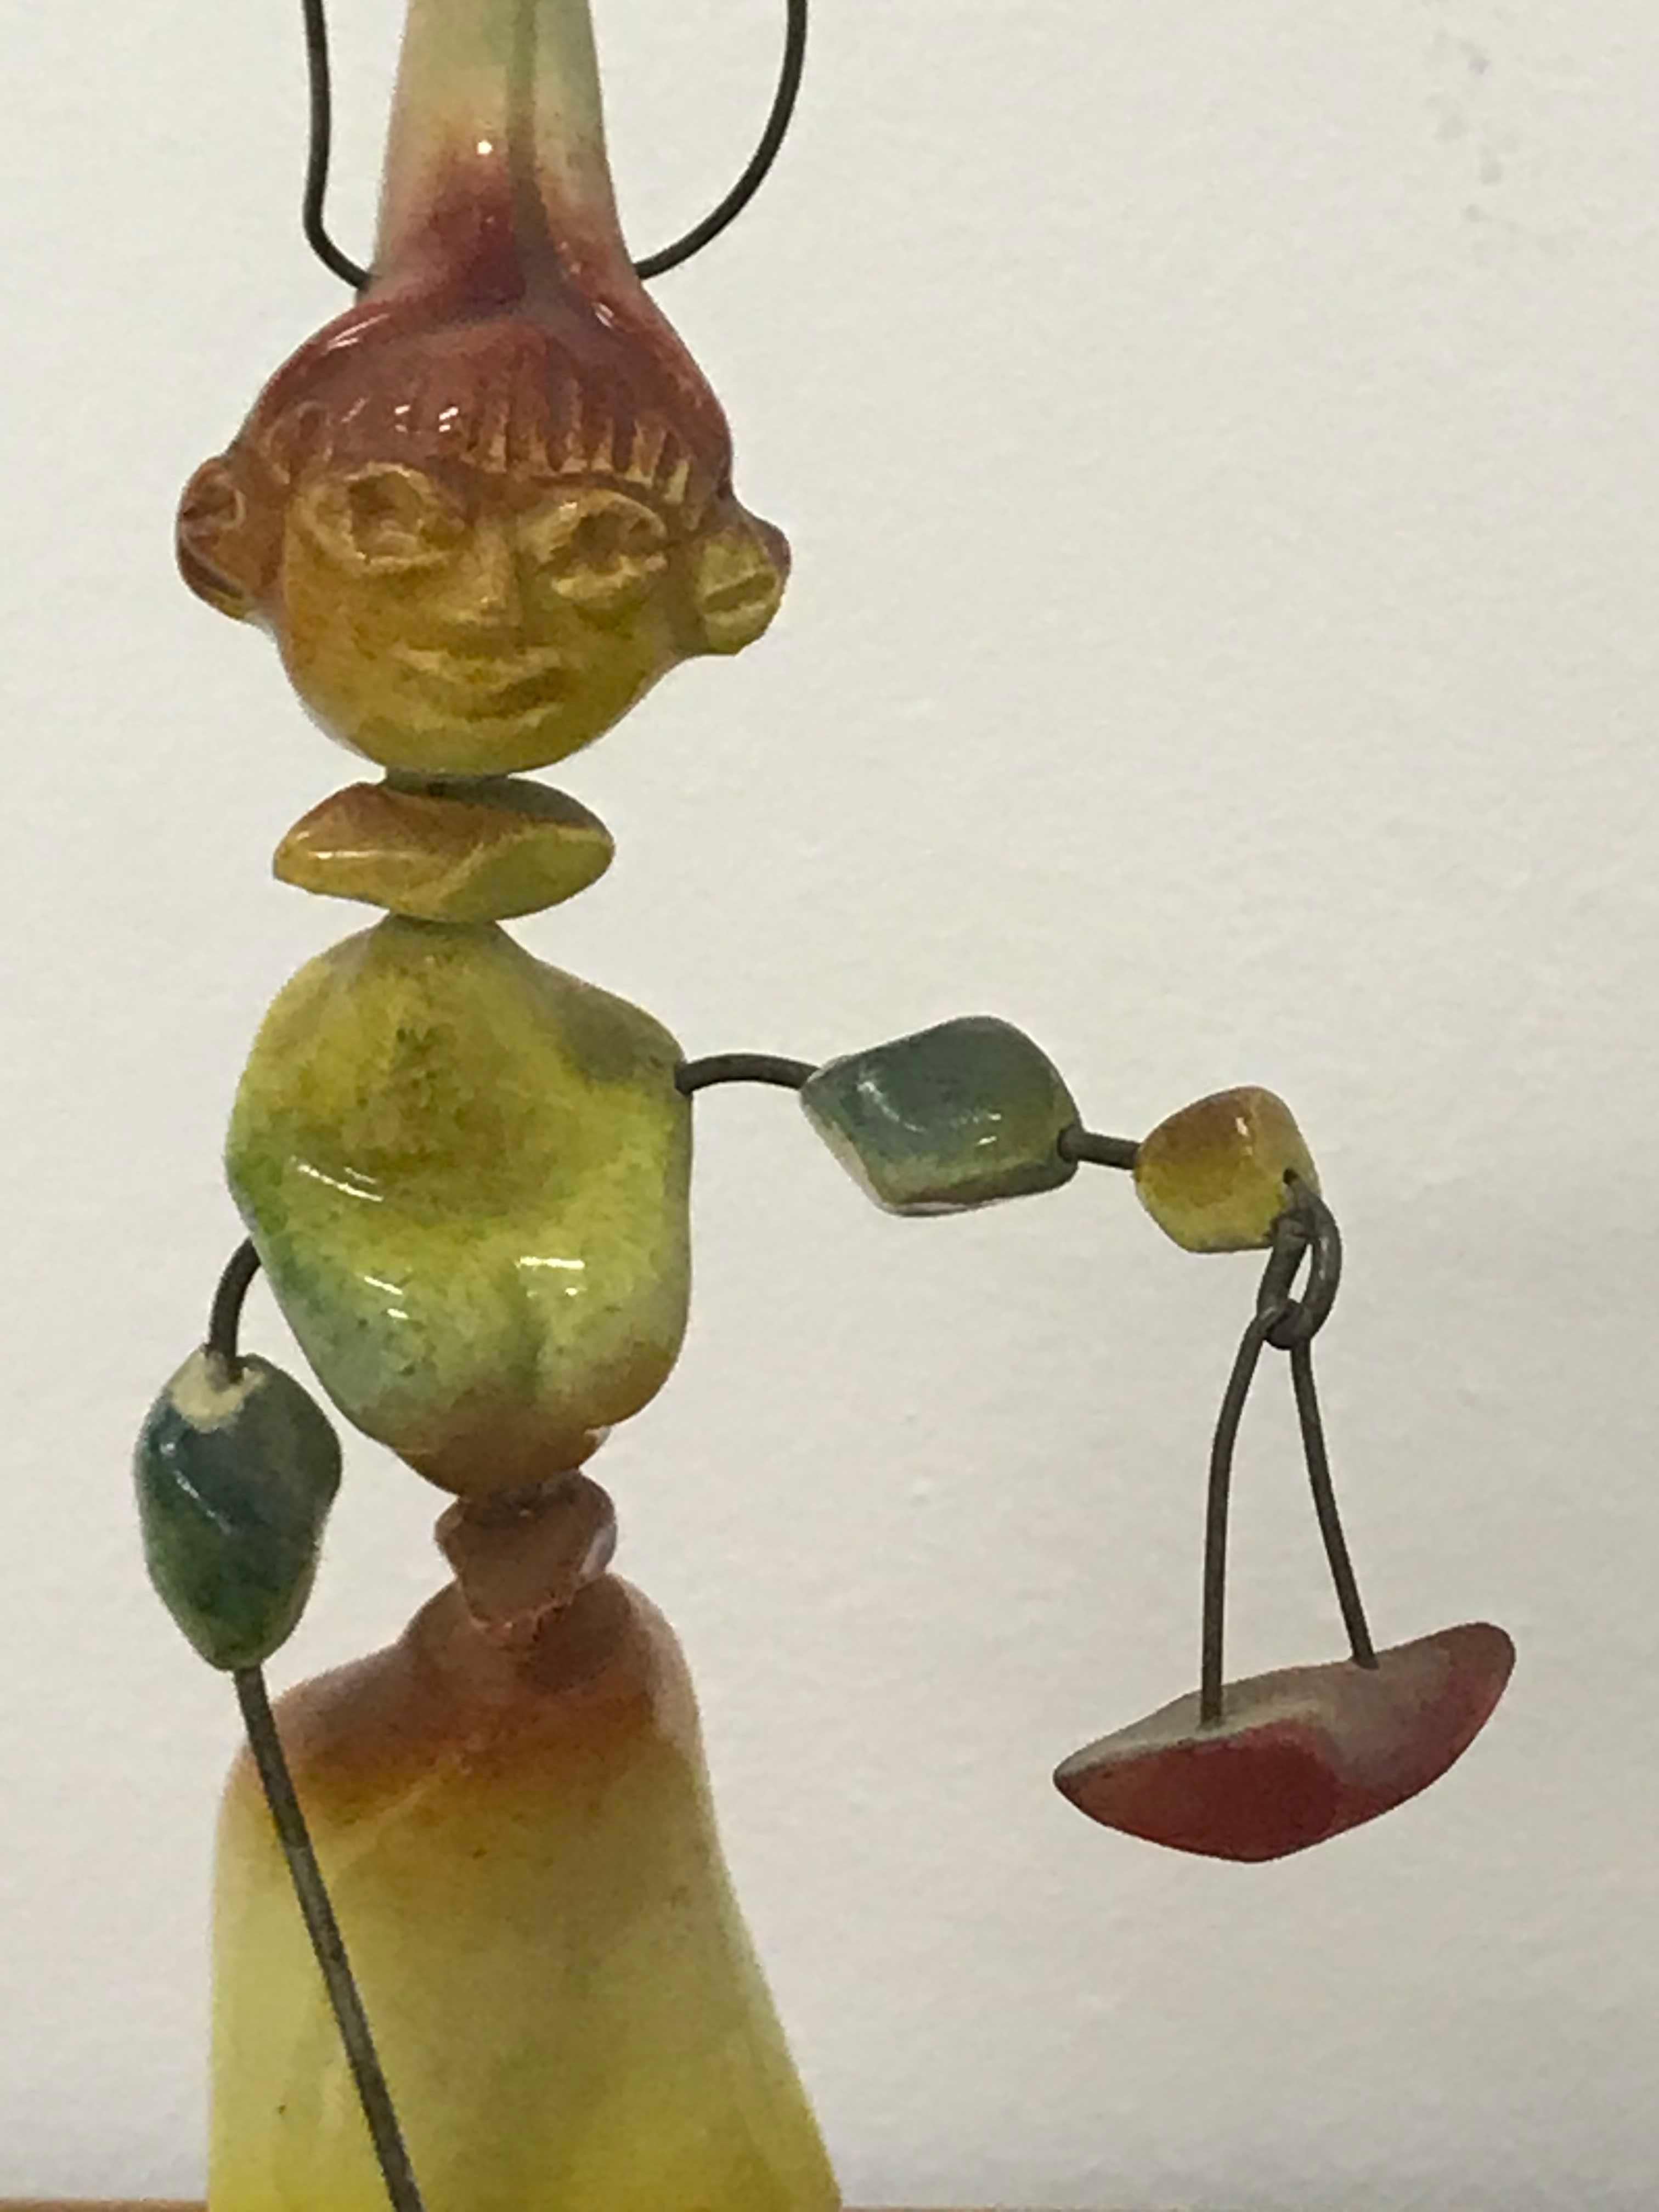 Manufacture Accolay, rare small ceramic sculpture assembled using metal wires.
Measures: Height of the woman 22 cm, height of the cat 8.5 cm.